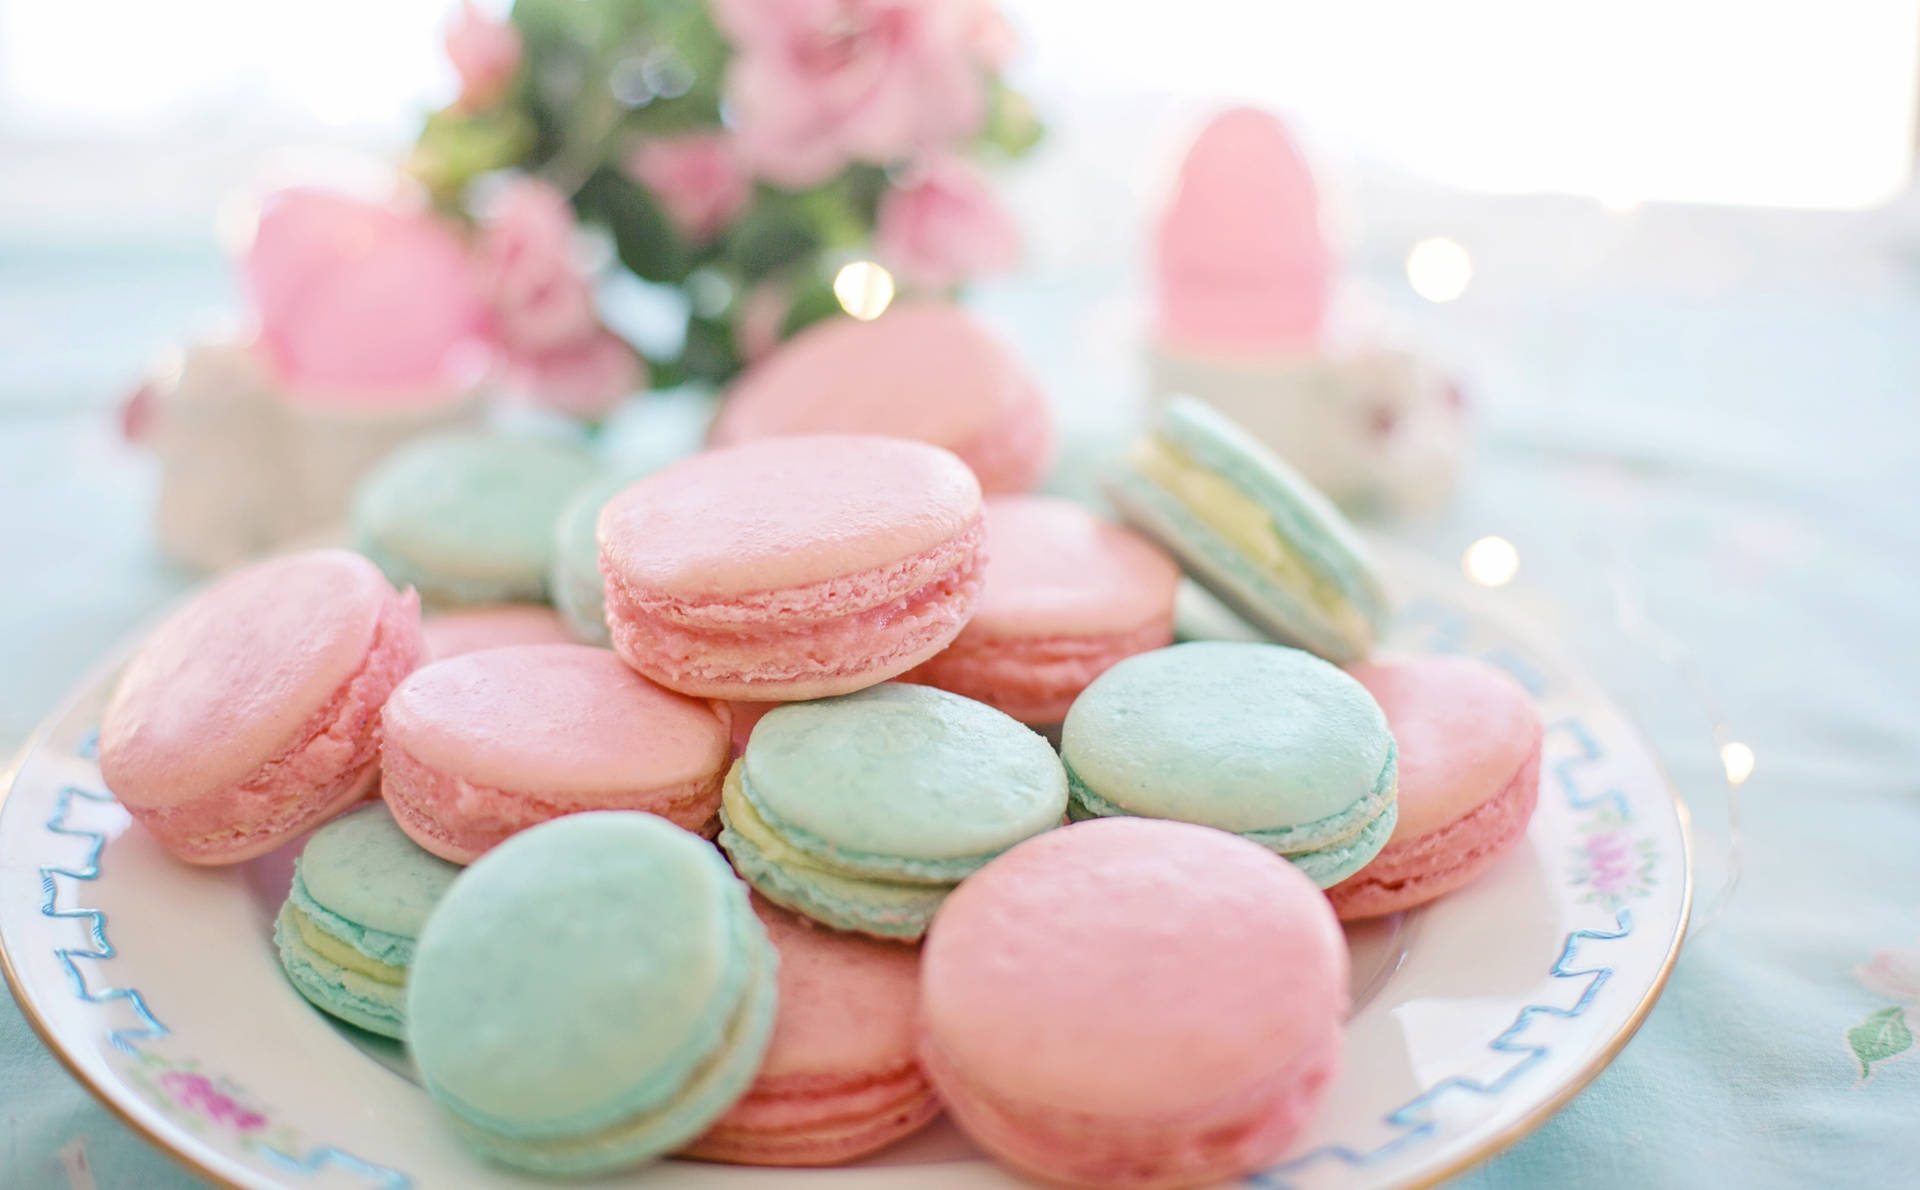 Sweet Delight In Pastel: Captivating Macaroons In Soft Colors Background